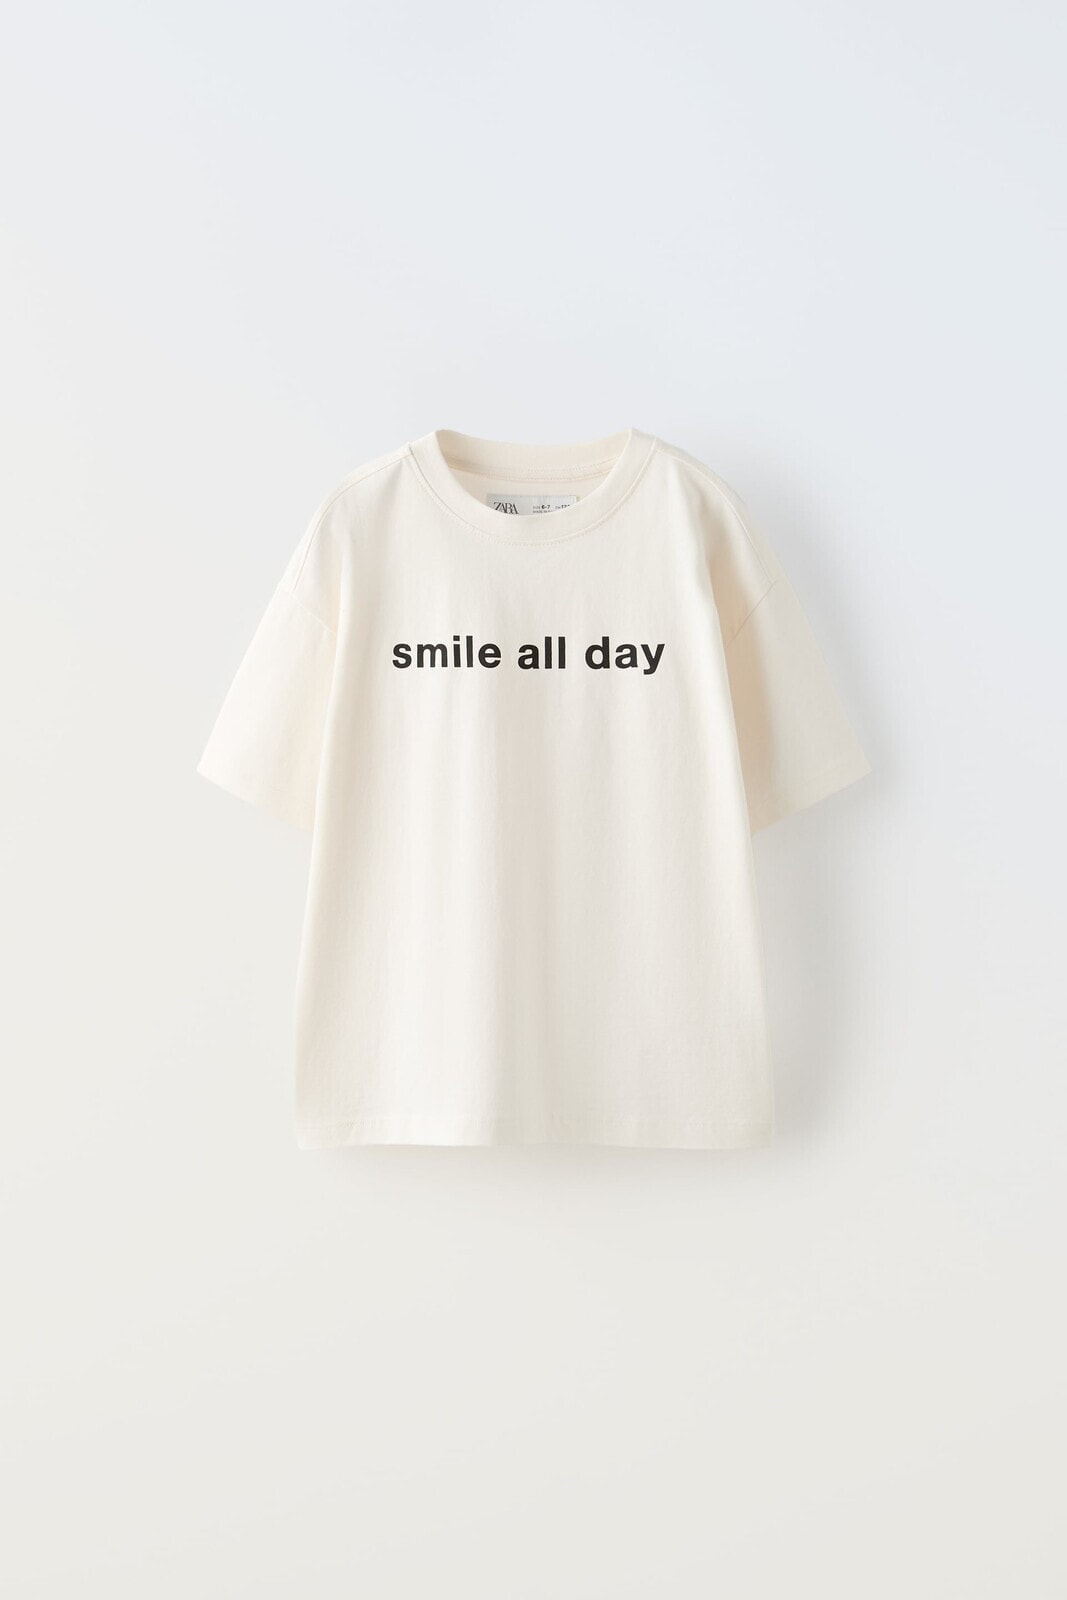 ‘smile all day’ t-shirt